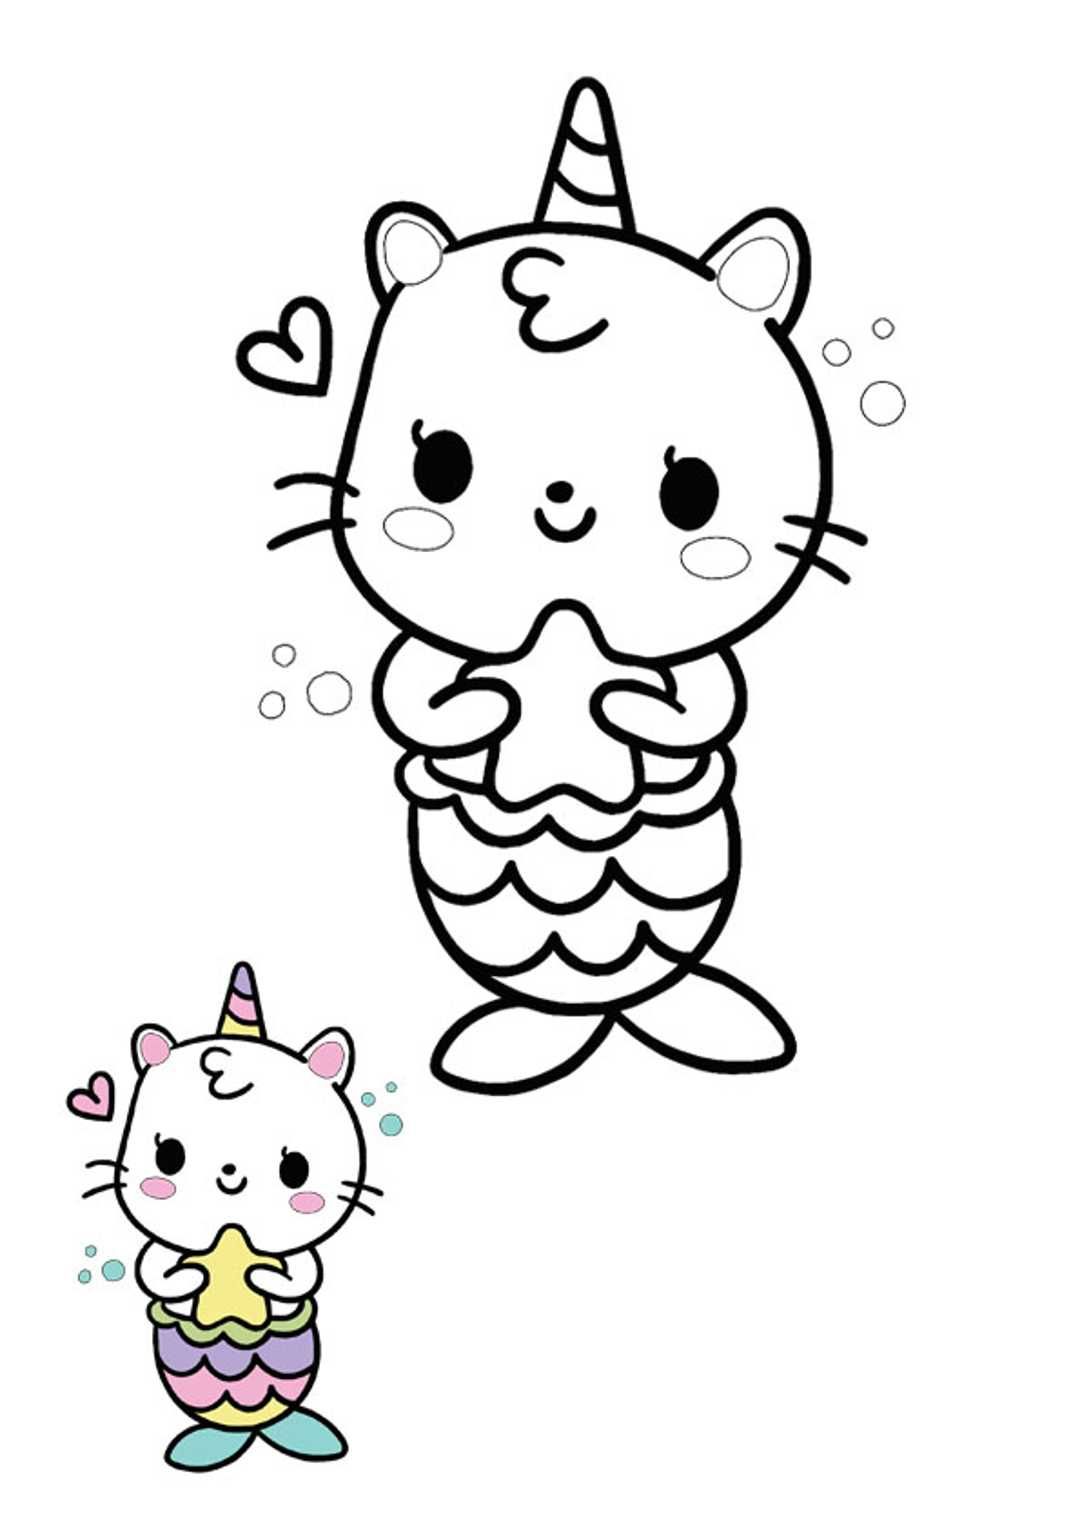 Unicorn Mermaid Coloring Pages | Cat coloring book, Mermaid coloring pages,  Hello kitty colouring pages